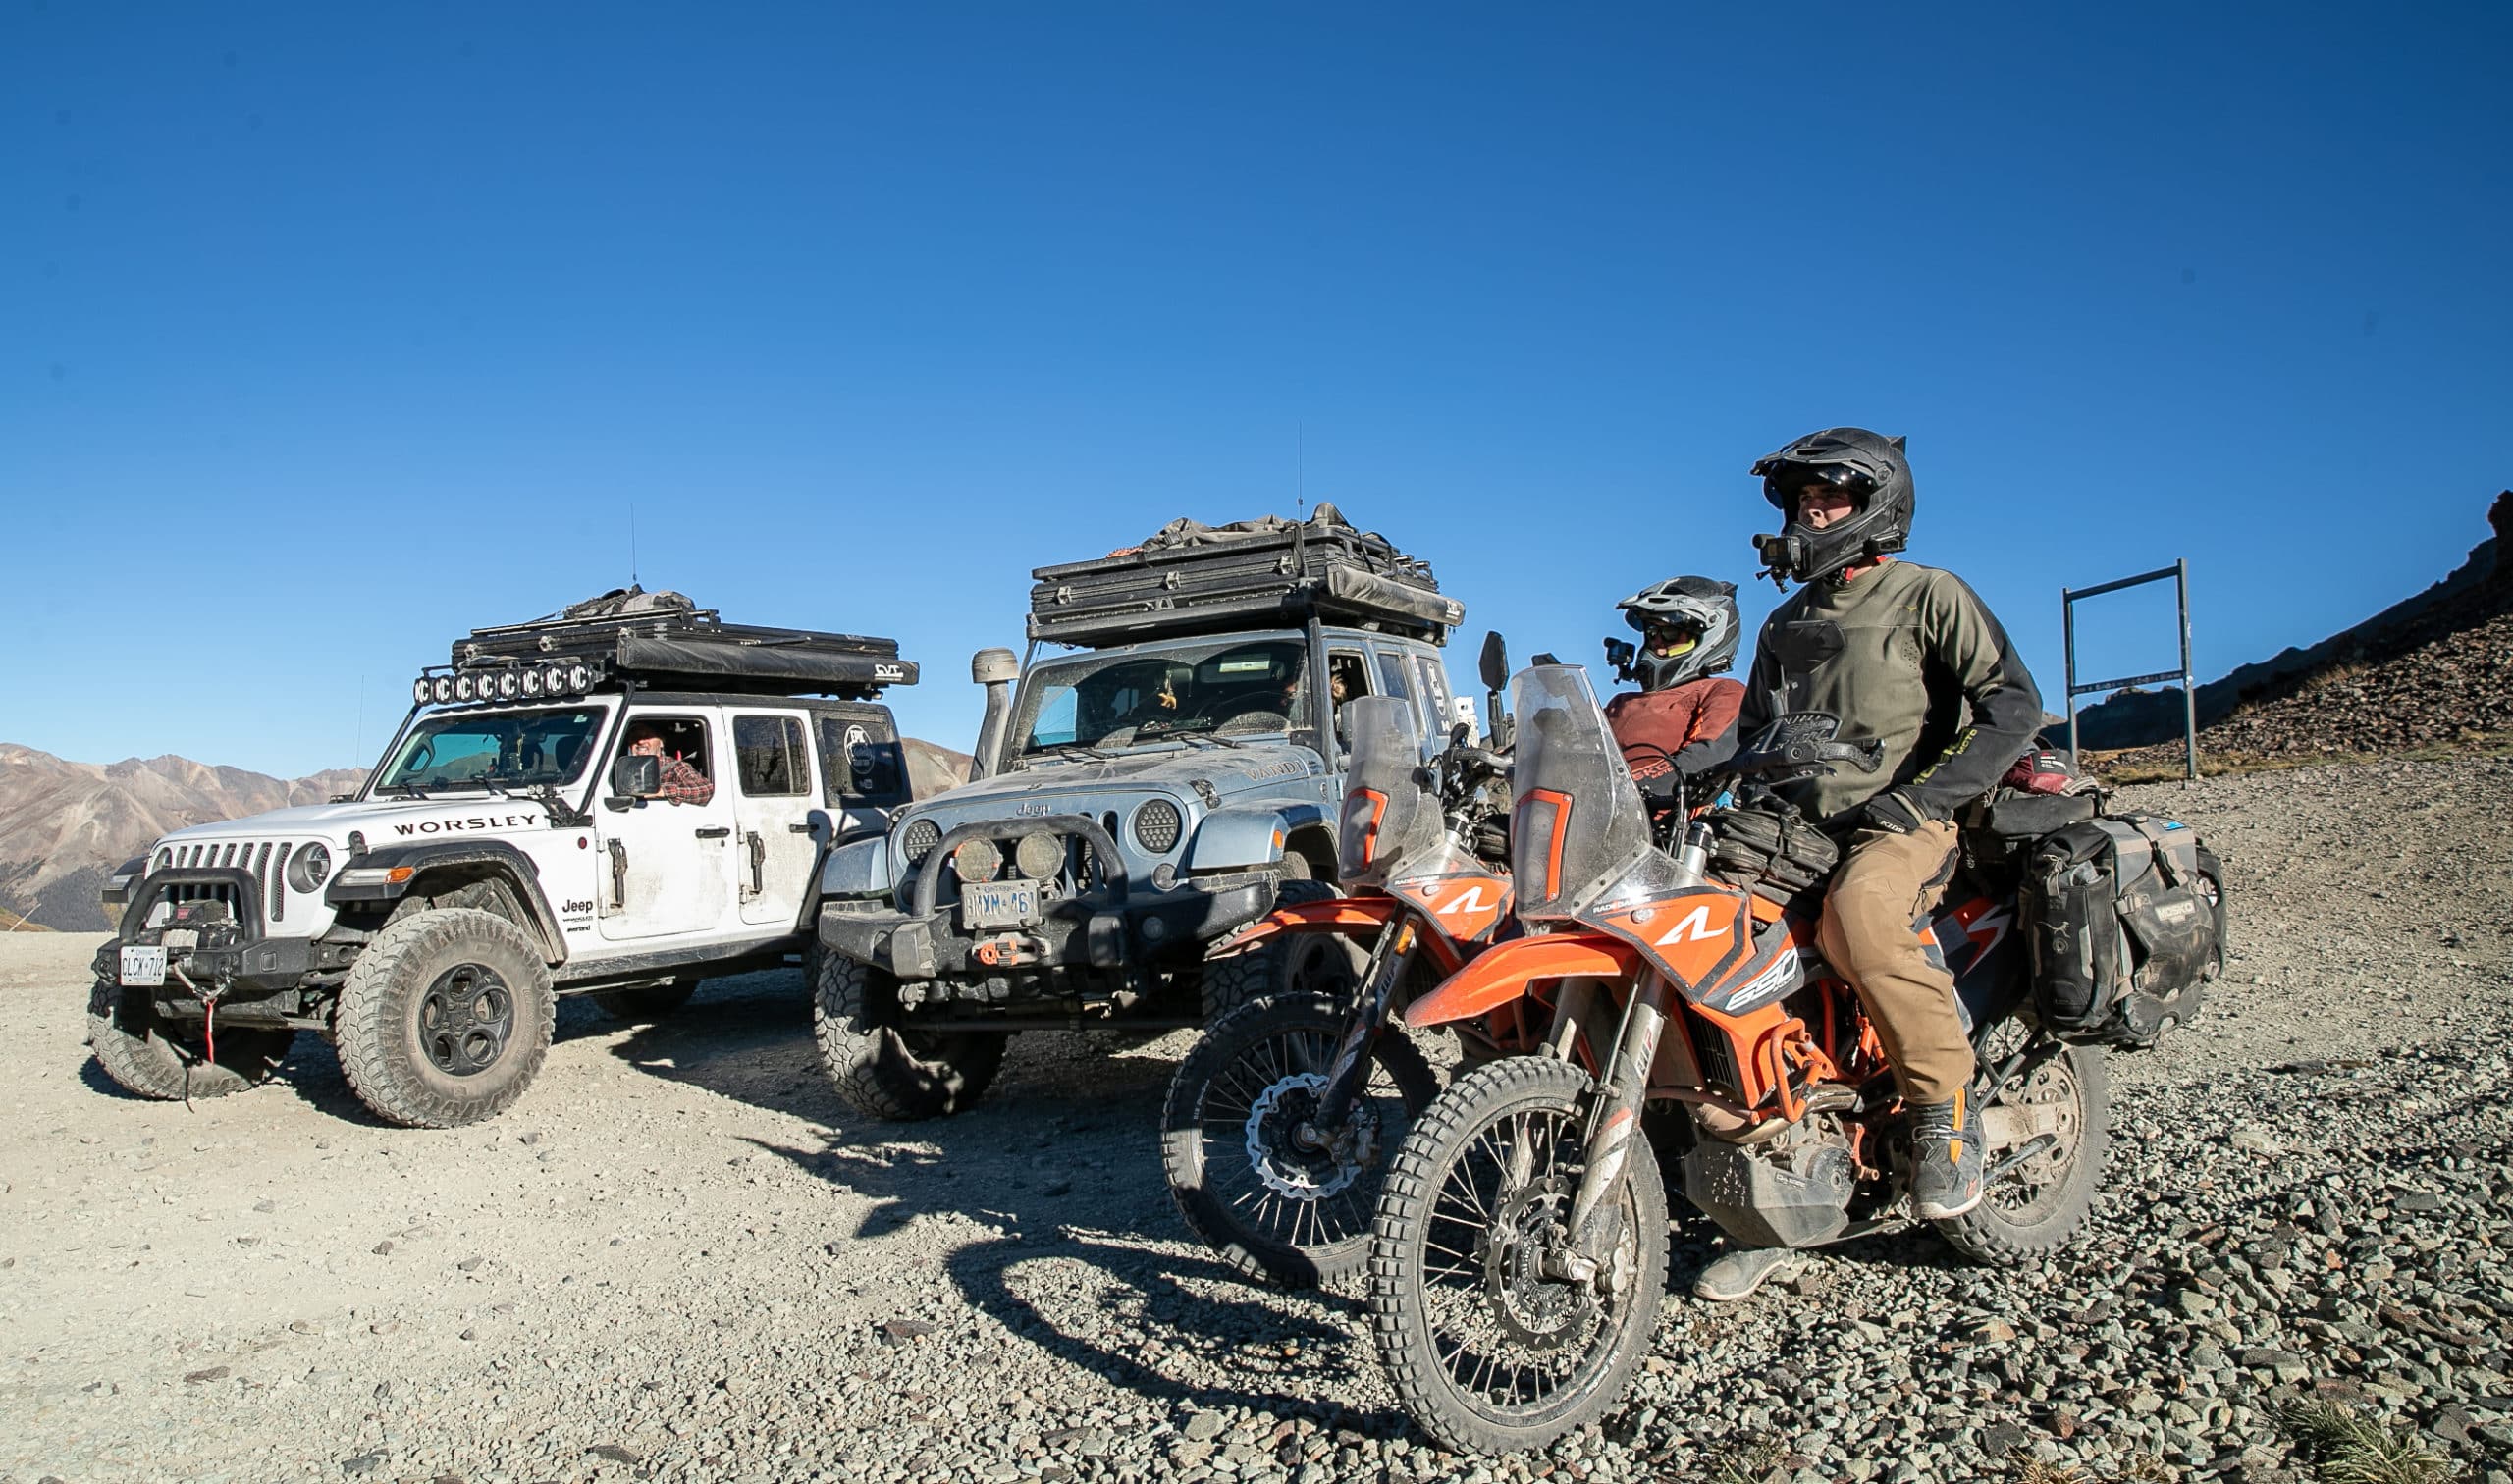 Epic Family Road Trip Family with Jeeps and Dirtbikes